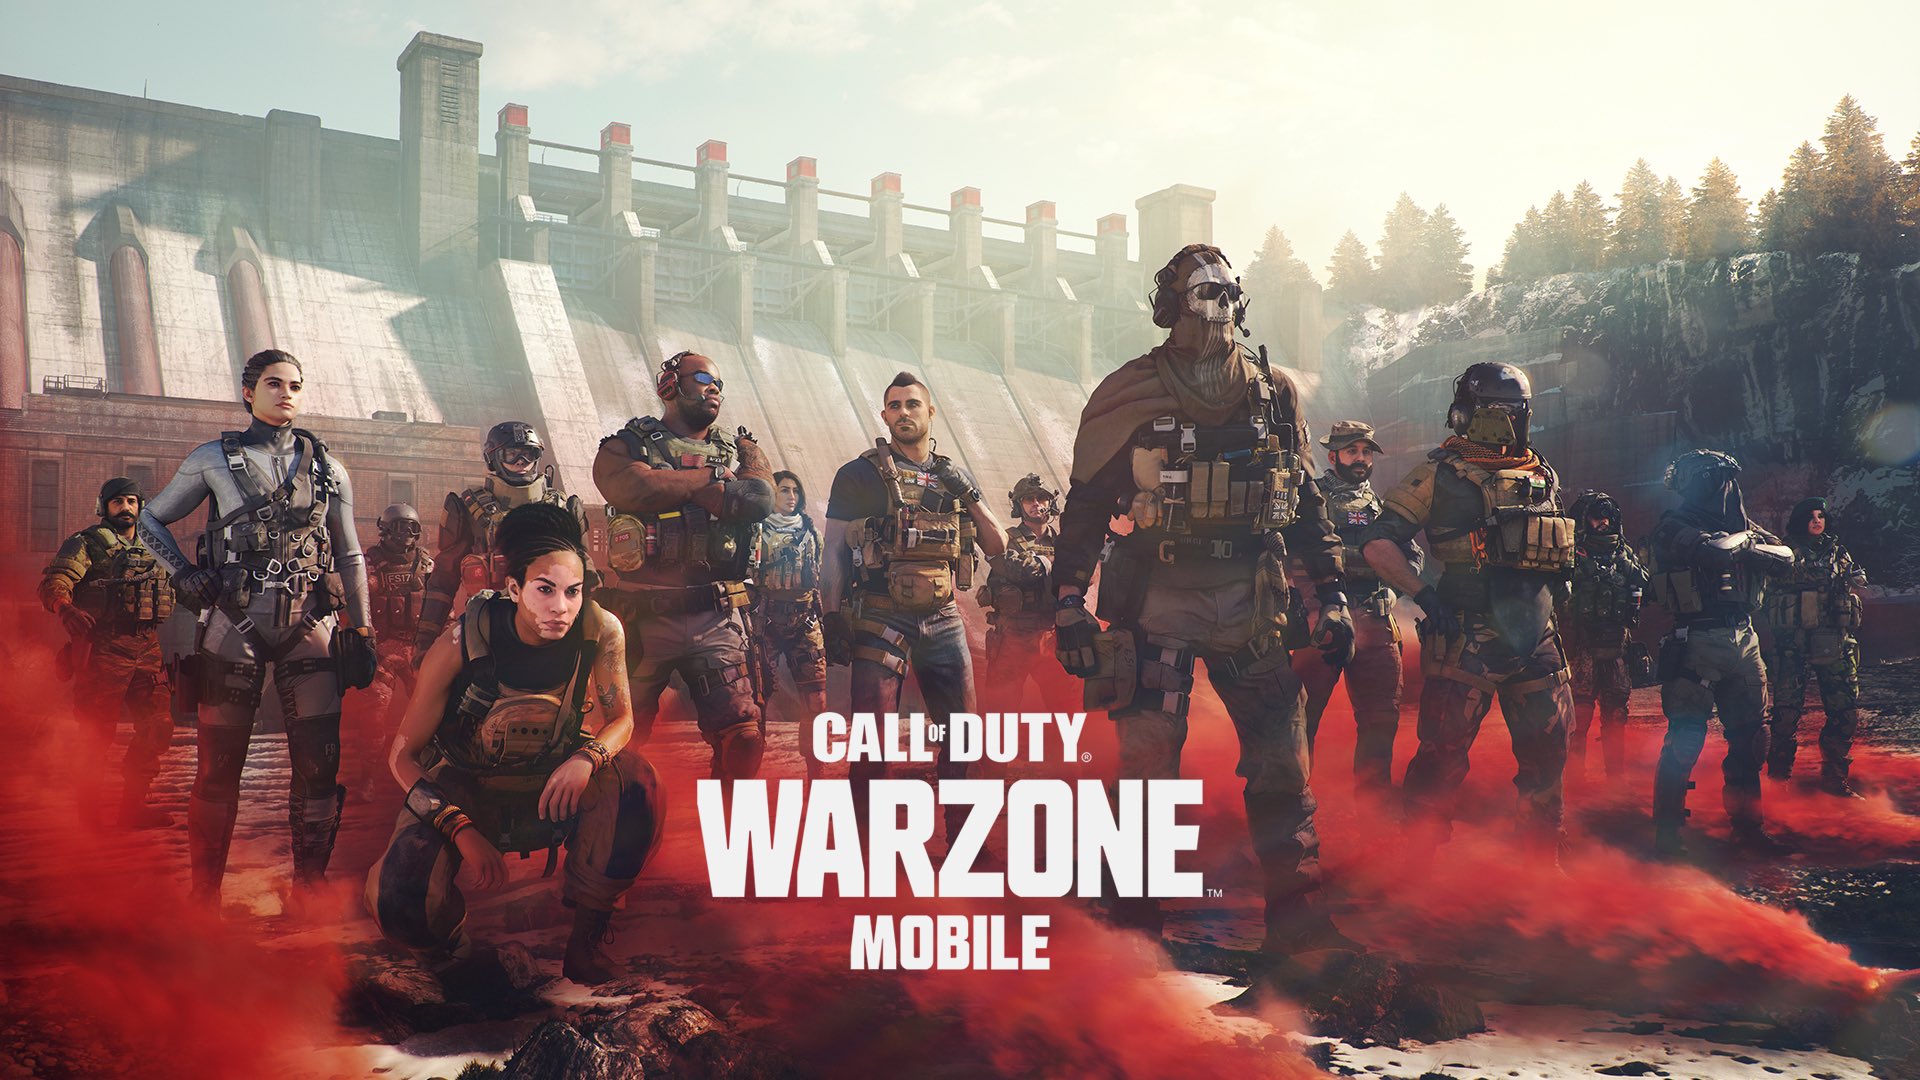 Stream Call Of Duty Warzone Mobile Mod Apk by Kami West